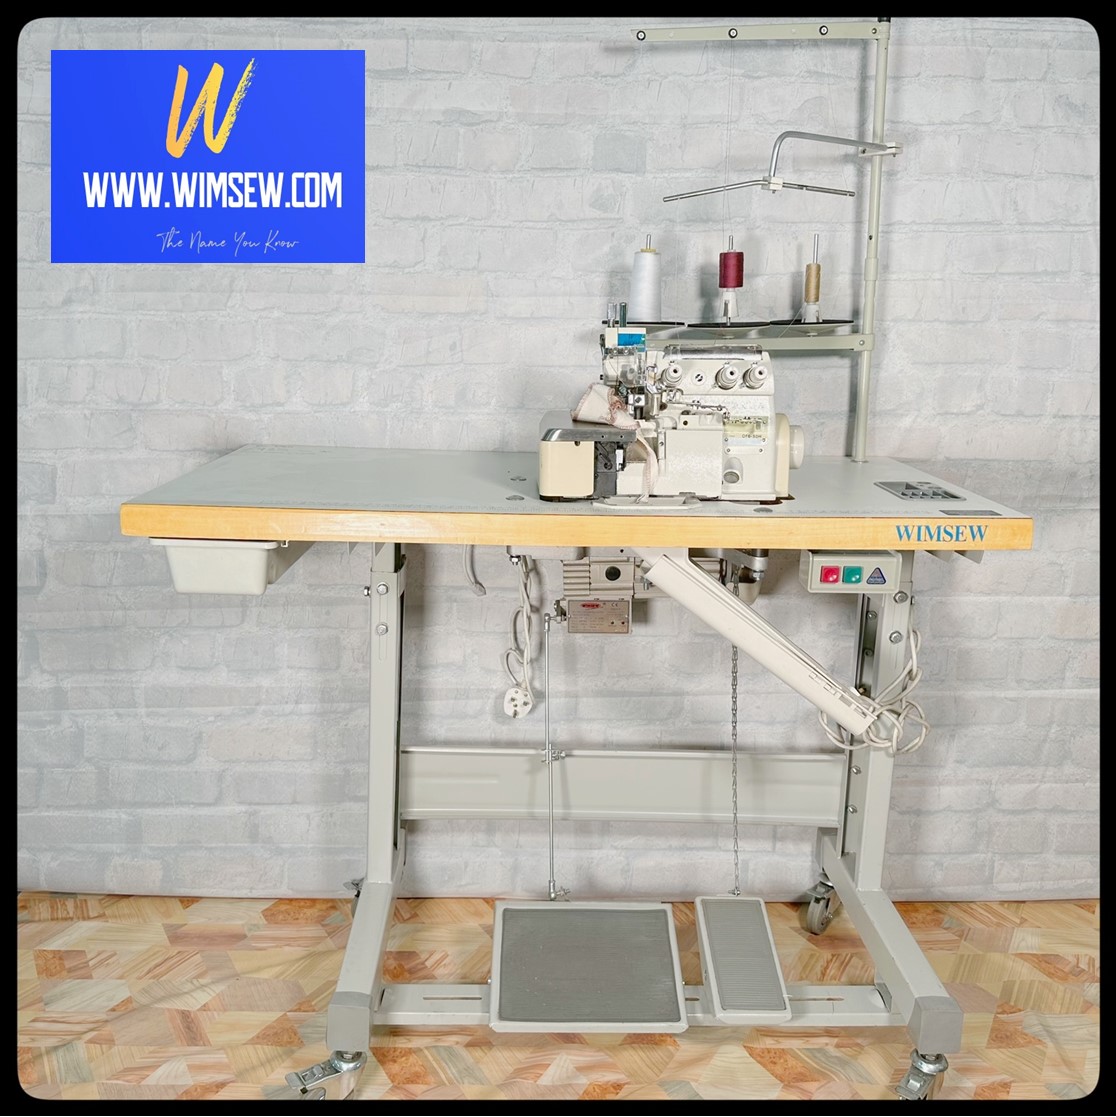 WIMSEW 8803 - 3 Thread Overlock Machine (Wheel Stand) - Call now for more information. 020 8767 0036 - choose option 3